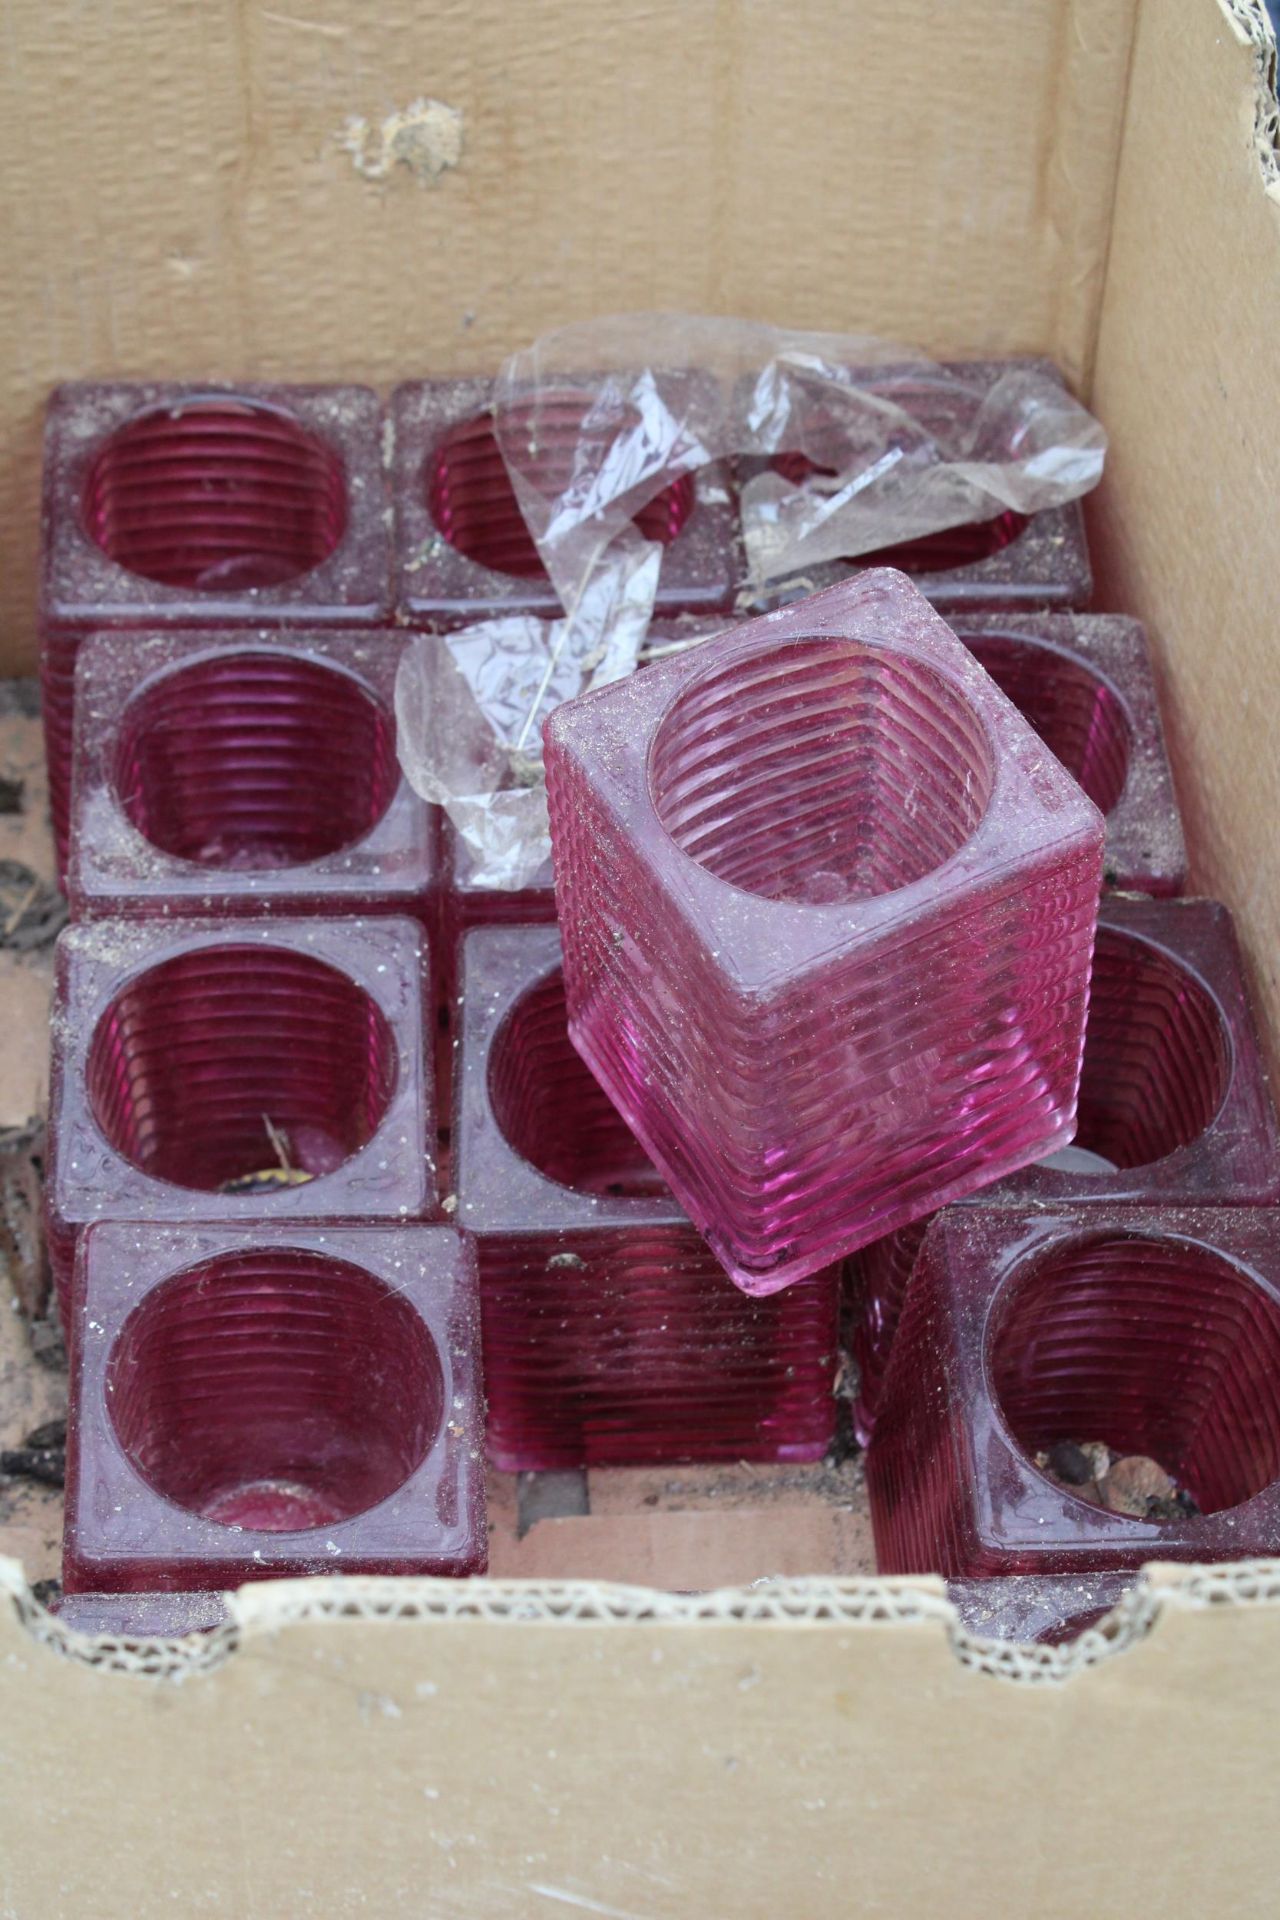 SEVENTEEN RED GLASS CANDLE HOLDERS - Image 2 of 4